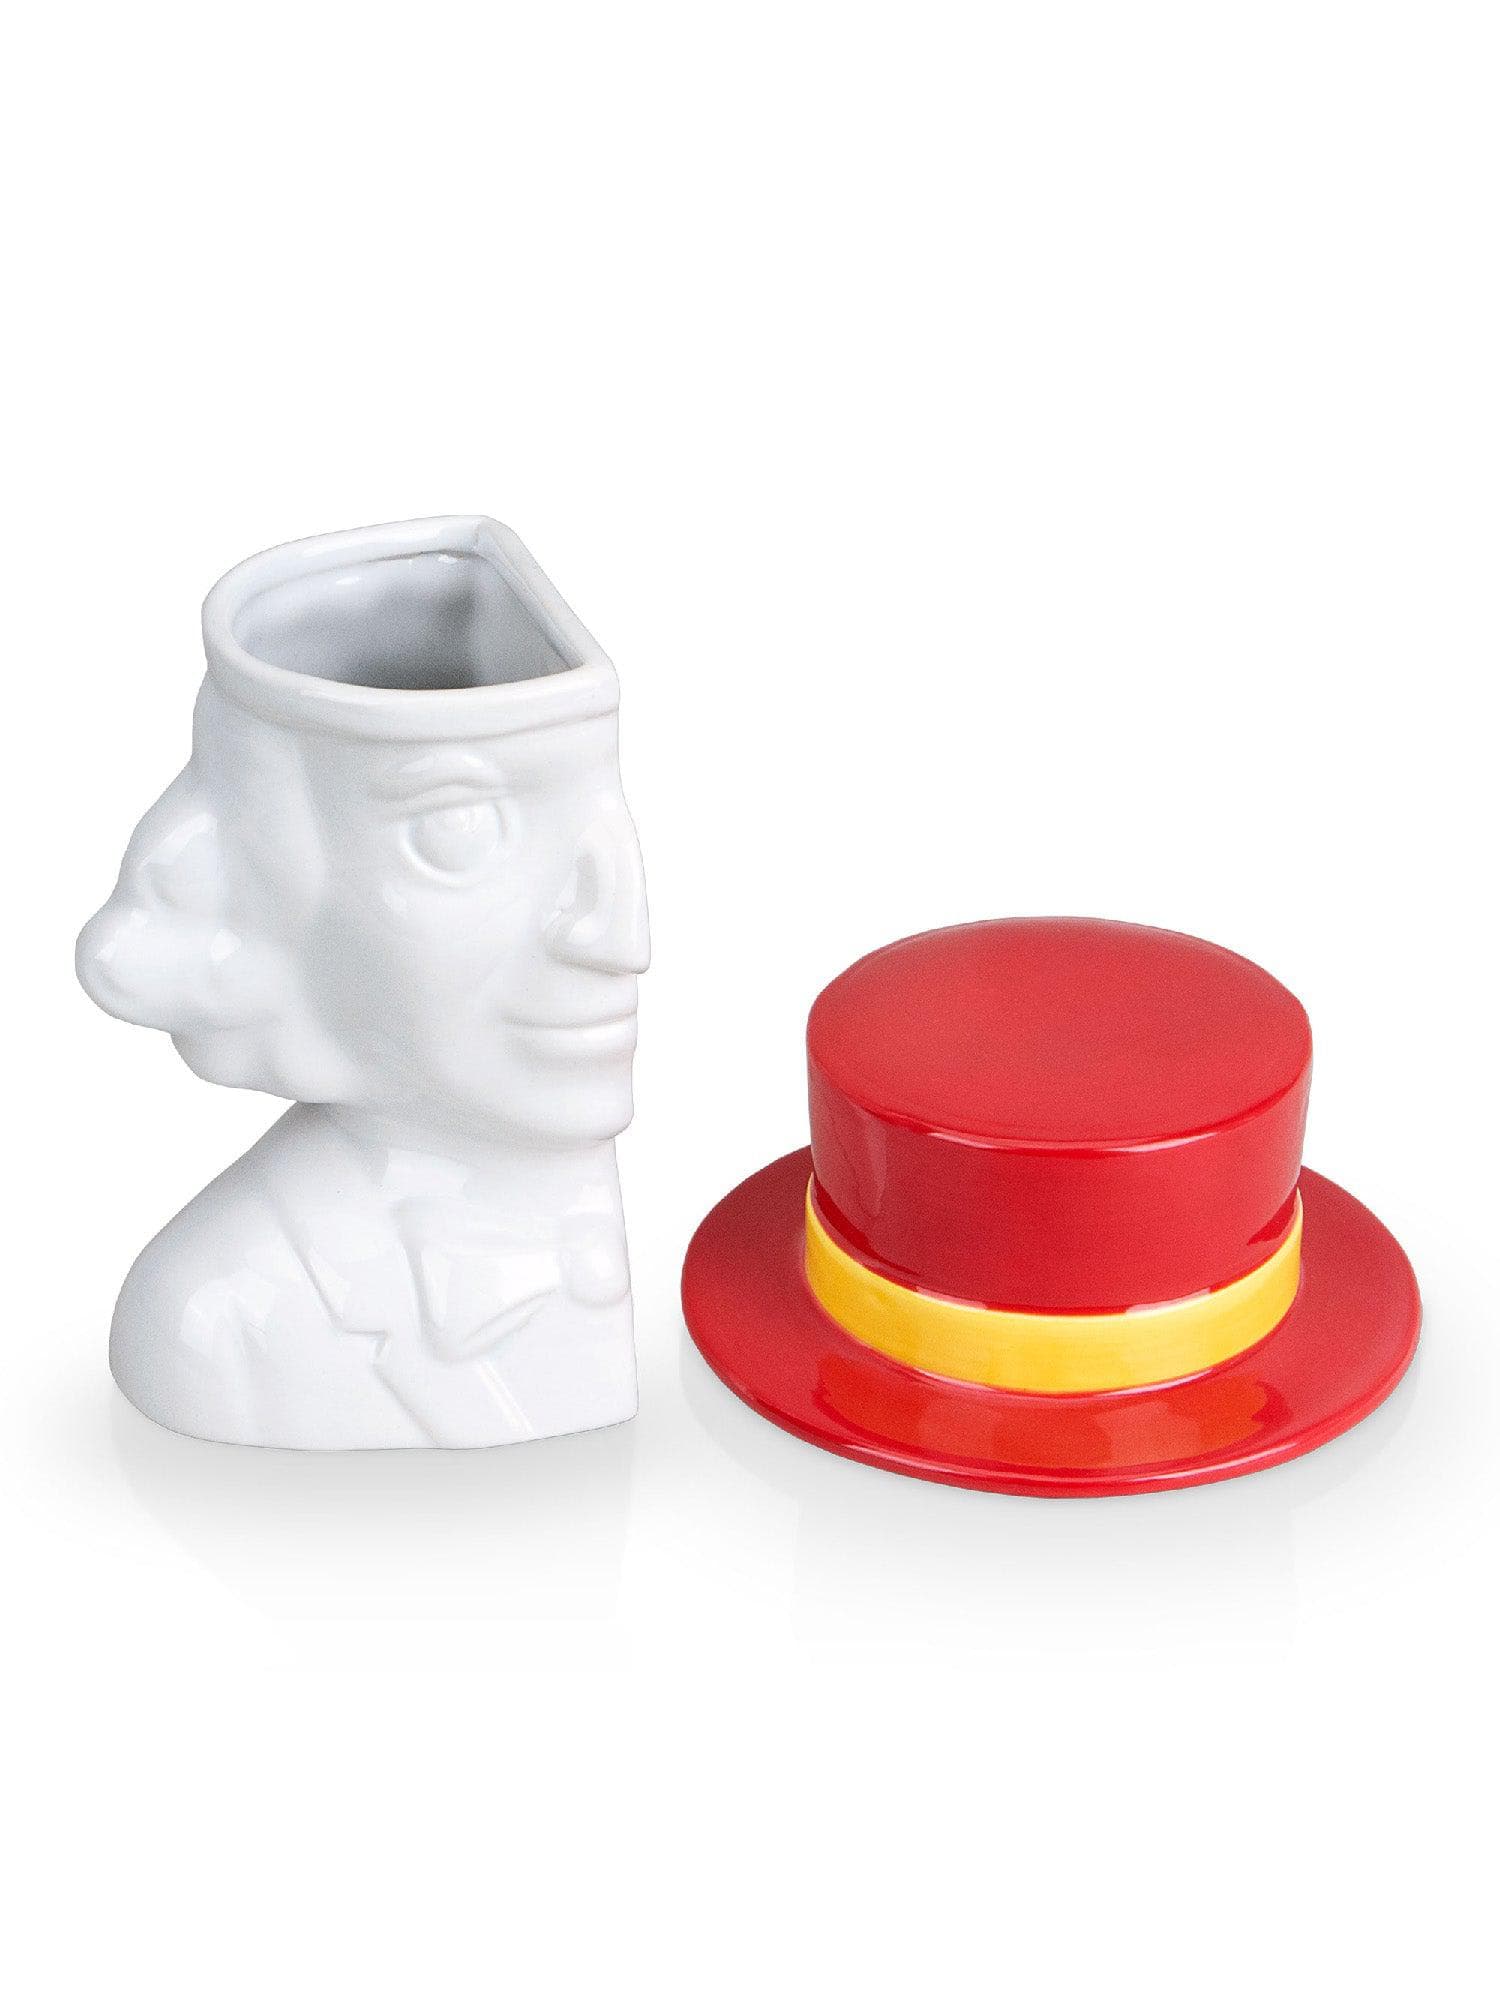 Willy Wonka & the Chocolate Factory Half Bust Cookie Jar - costumes.com